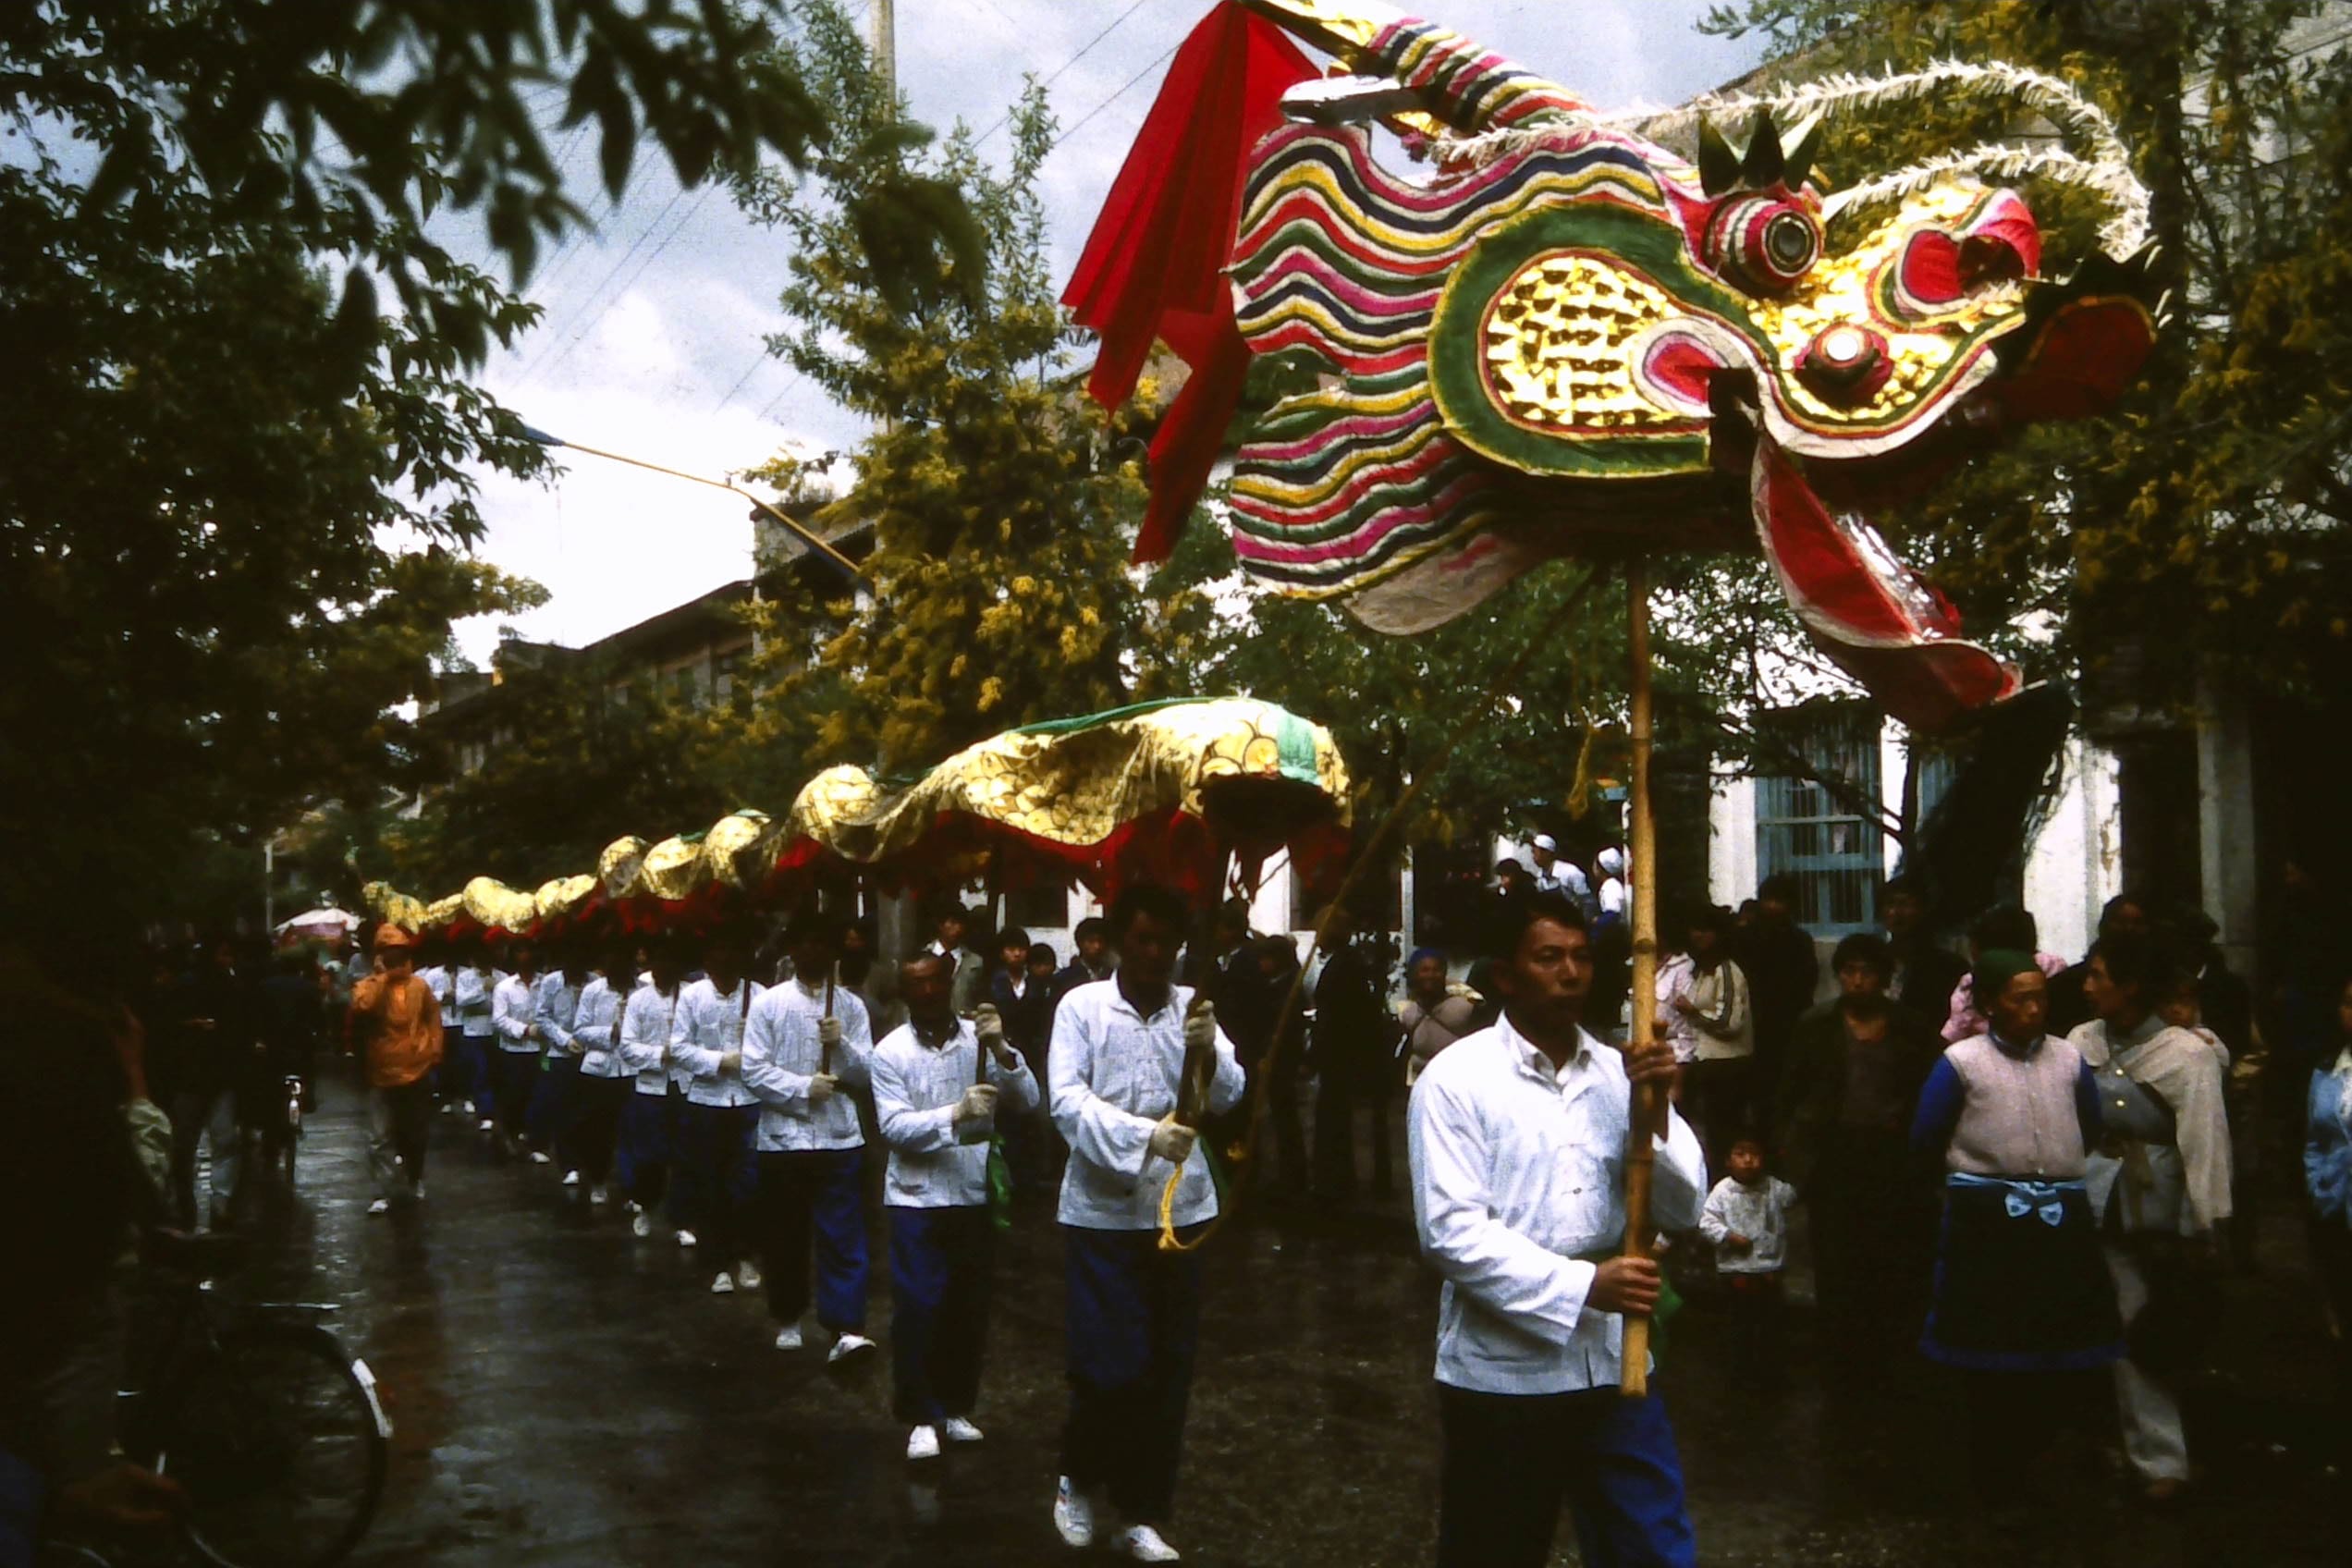 Dali. Chinese New Year procession of the serpent. Through the streets and perimeter of town.